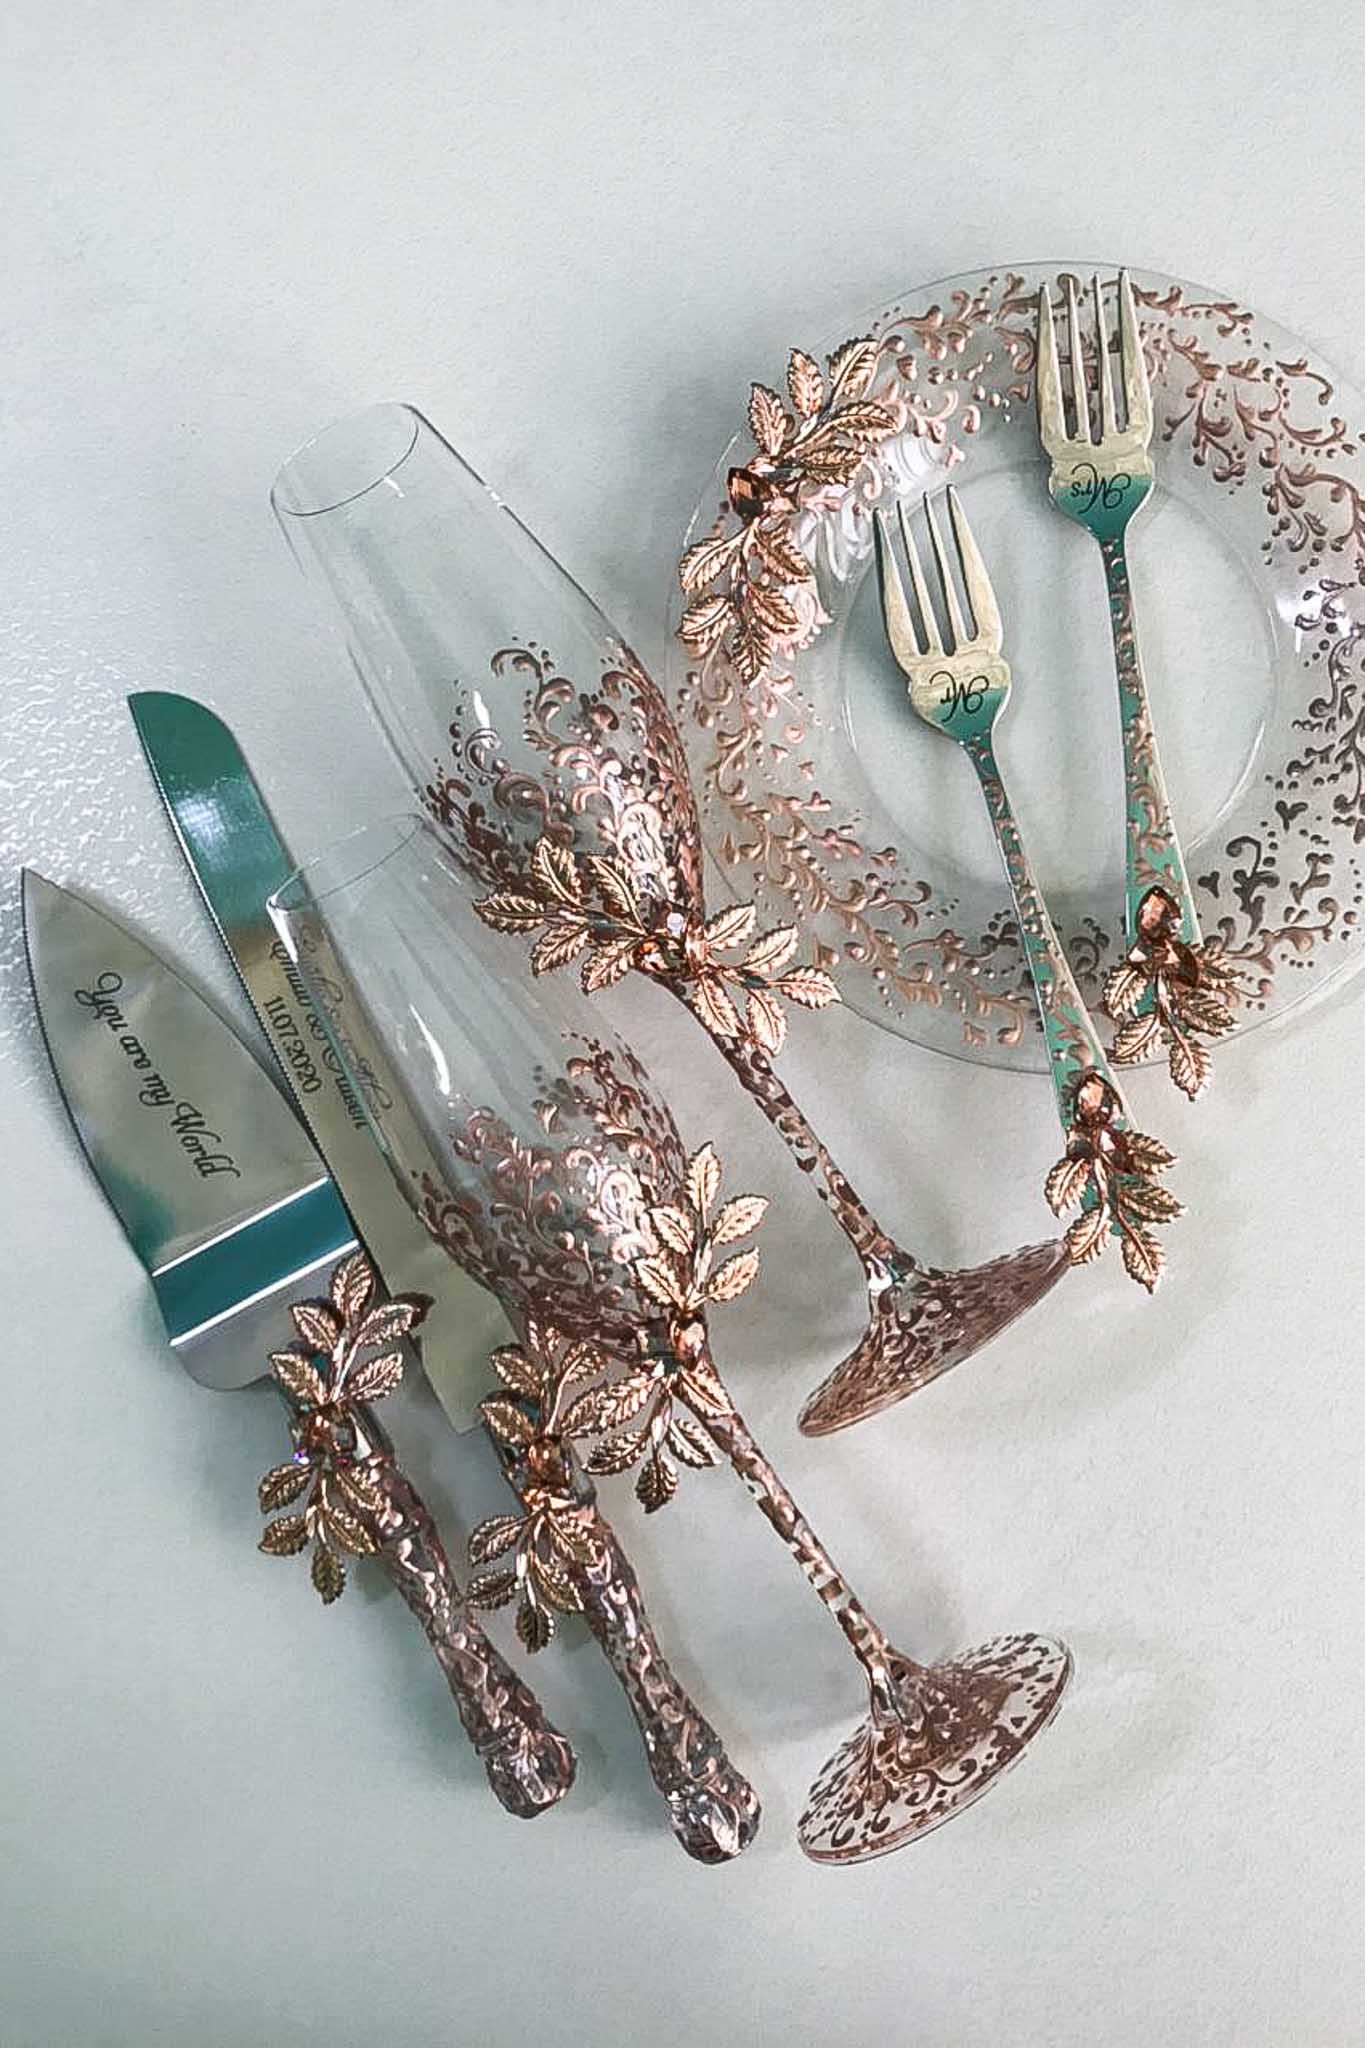 Enchanting champagne flutes and cake server set perfect for Aurora-themed weddings